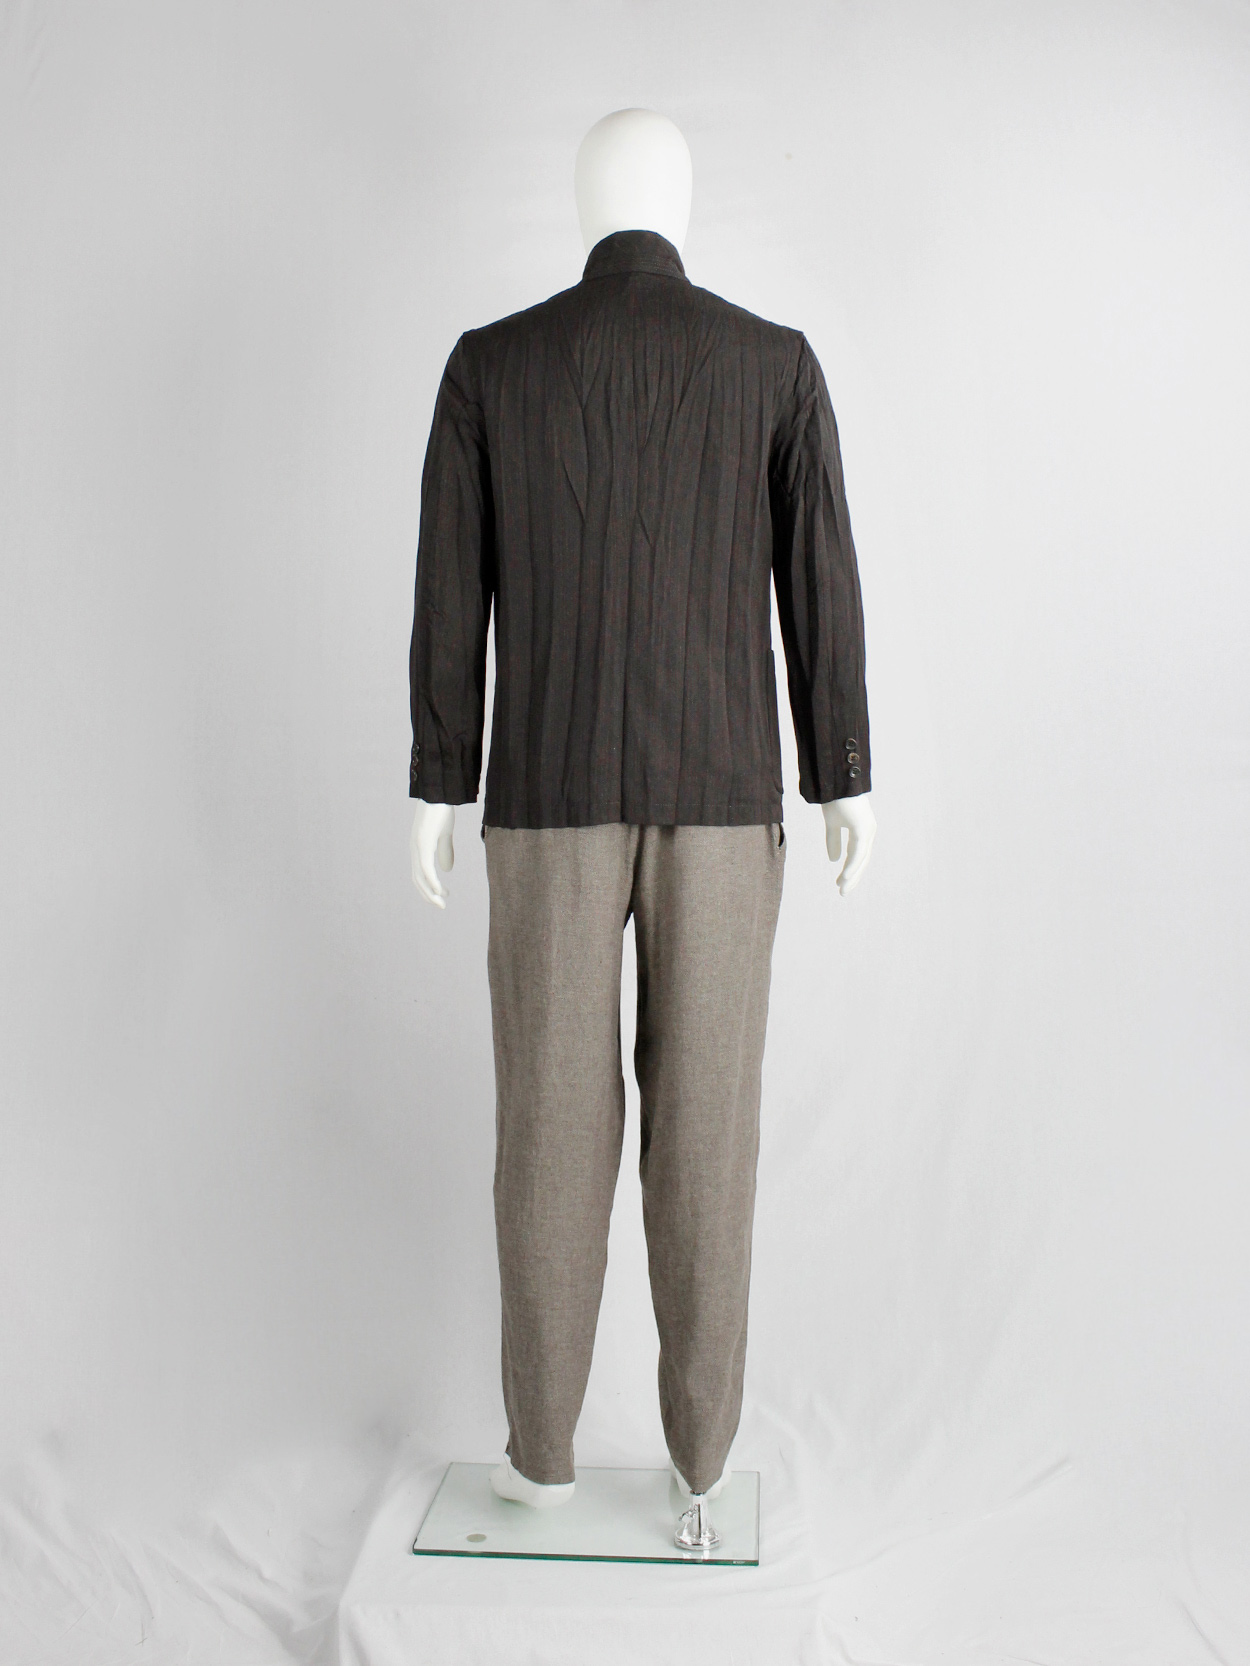 Comme des Garcons Homme brown blazer with pressed accordeon pleats AD 2004 (11)